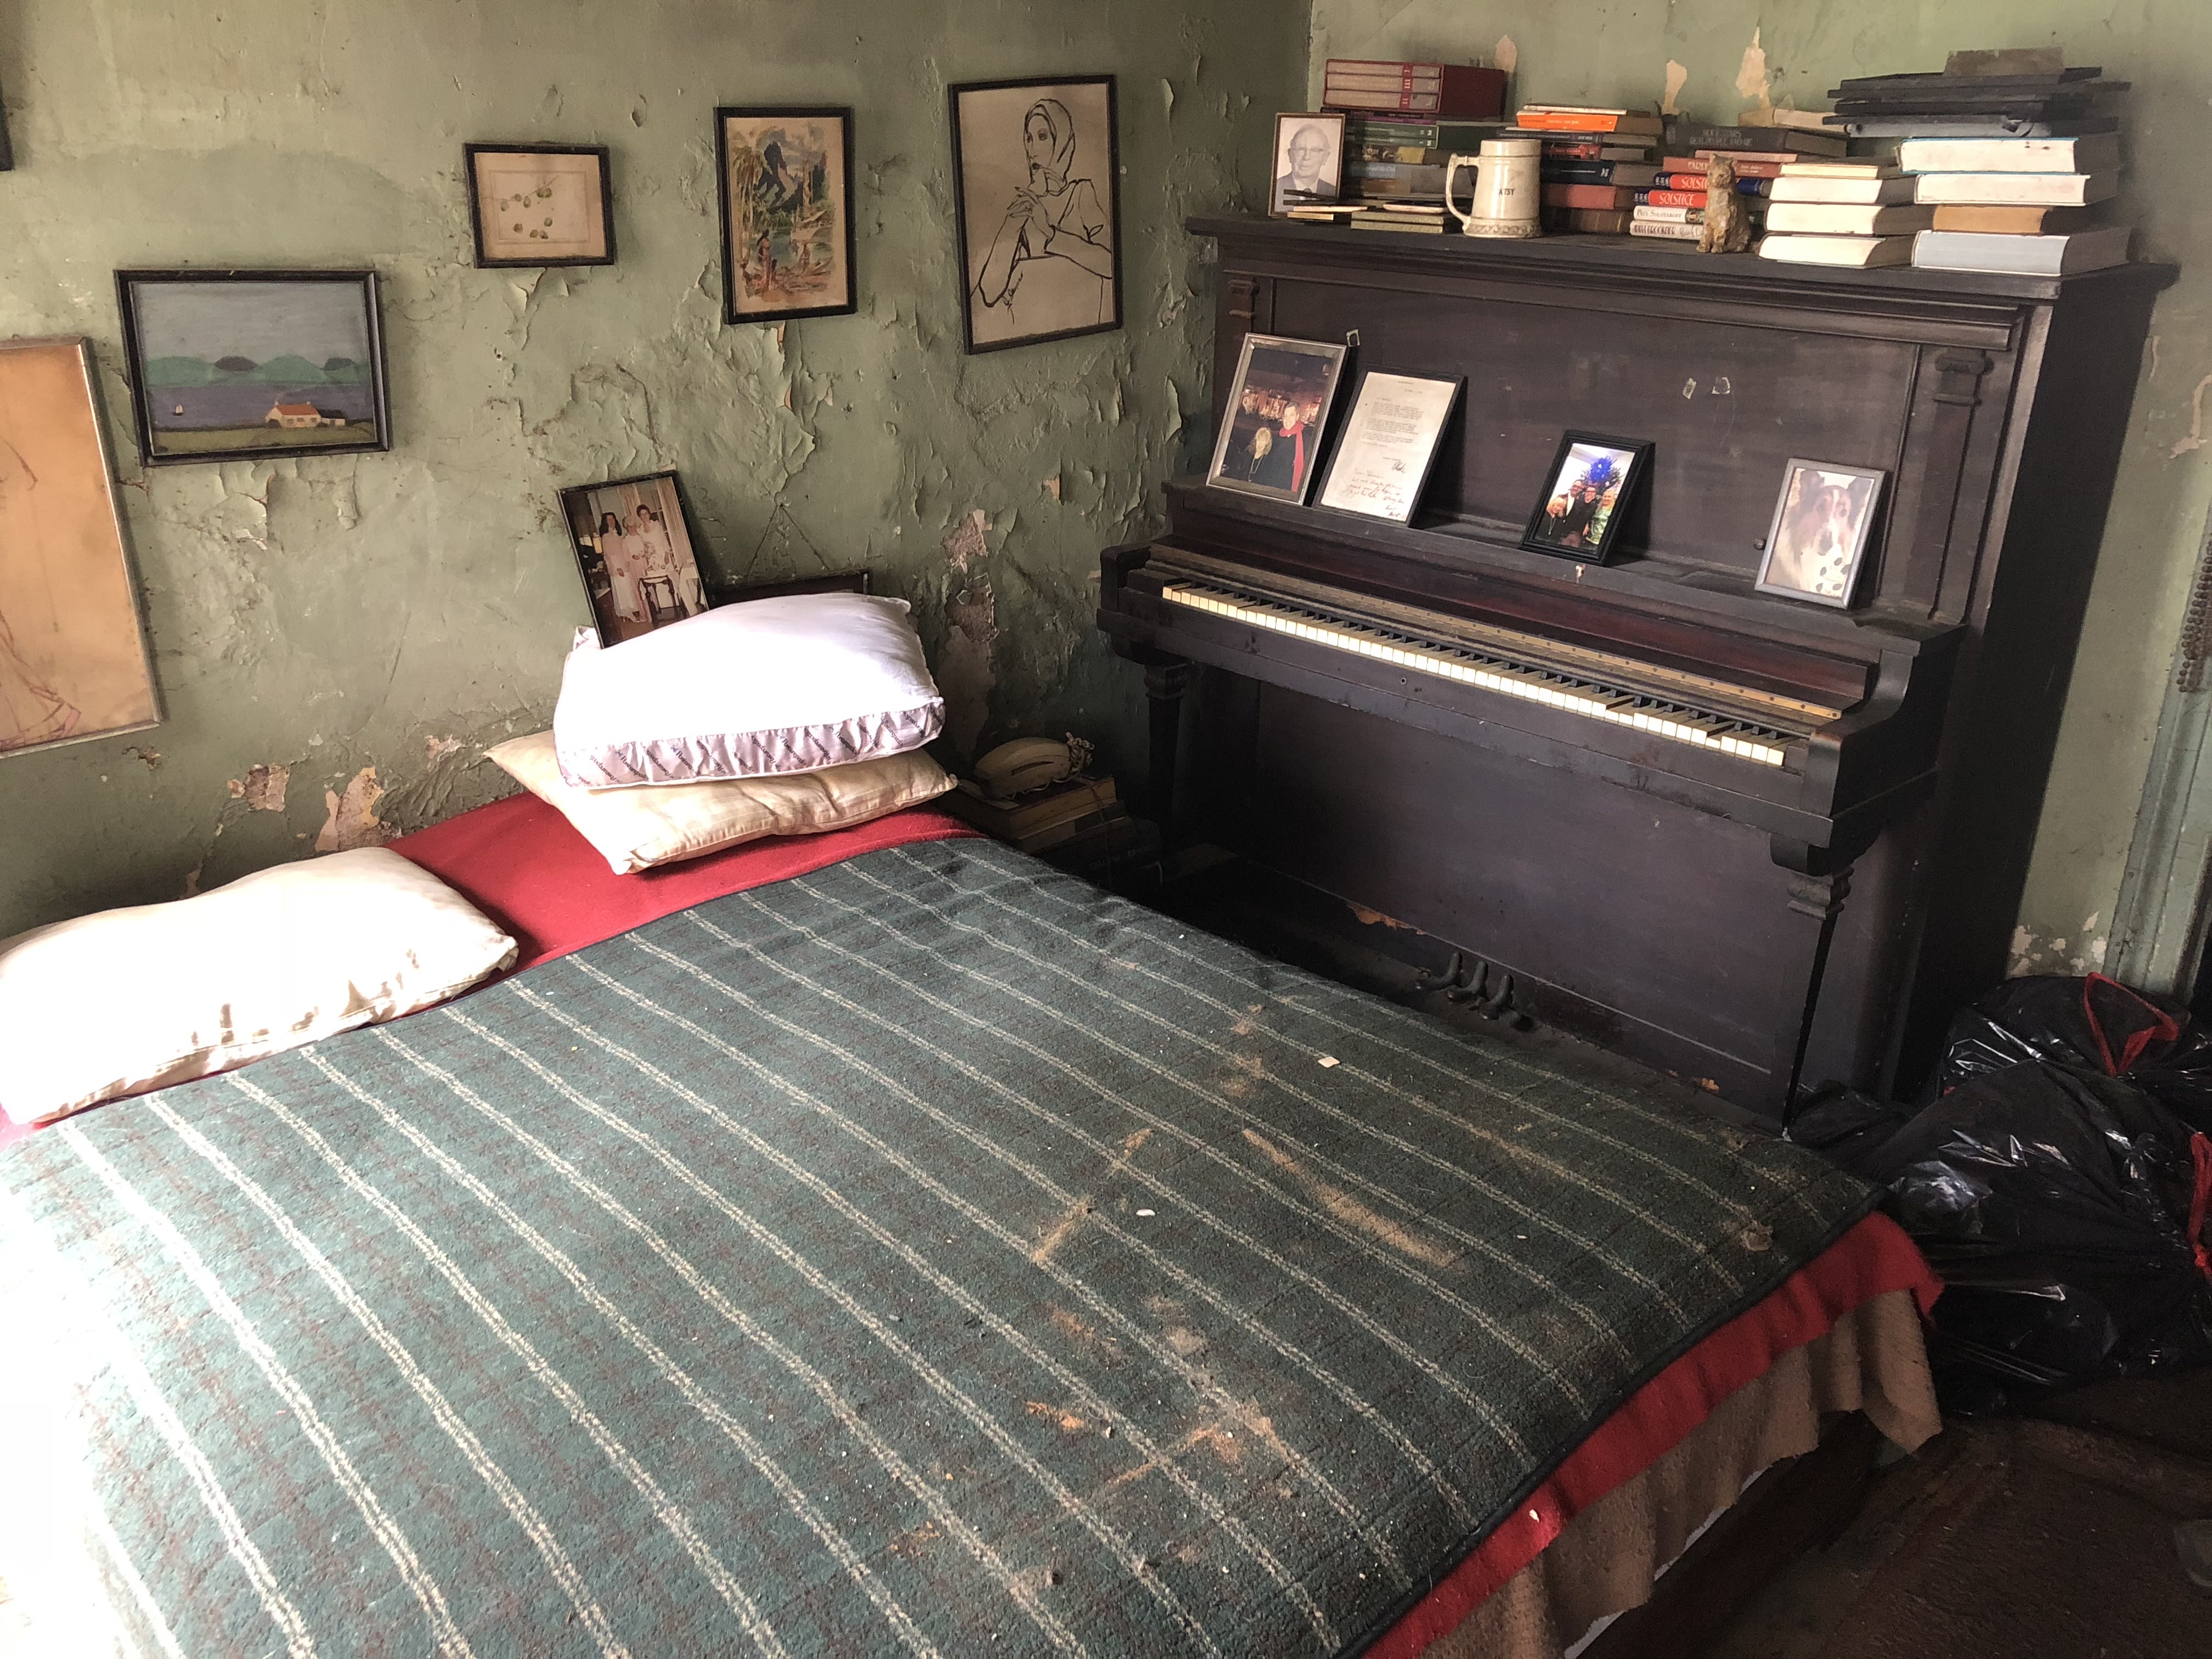 NYC Rooms for Rent